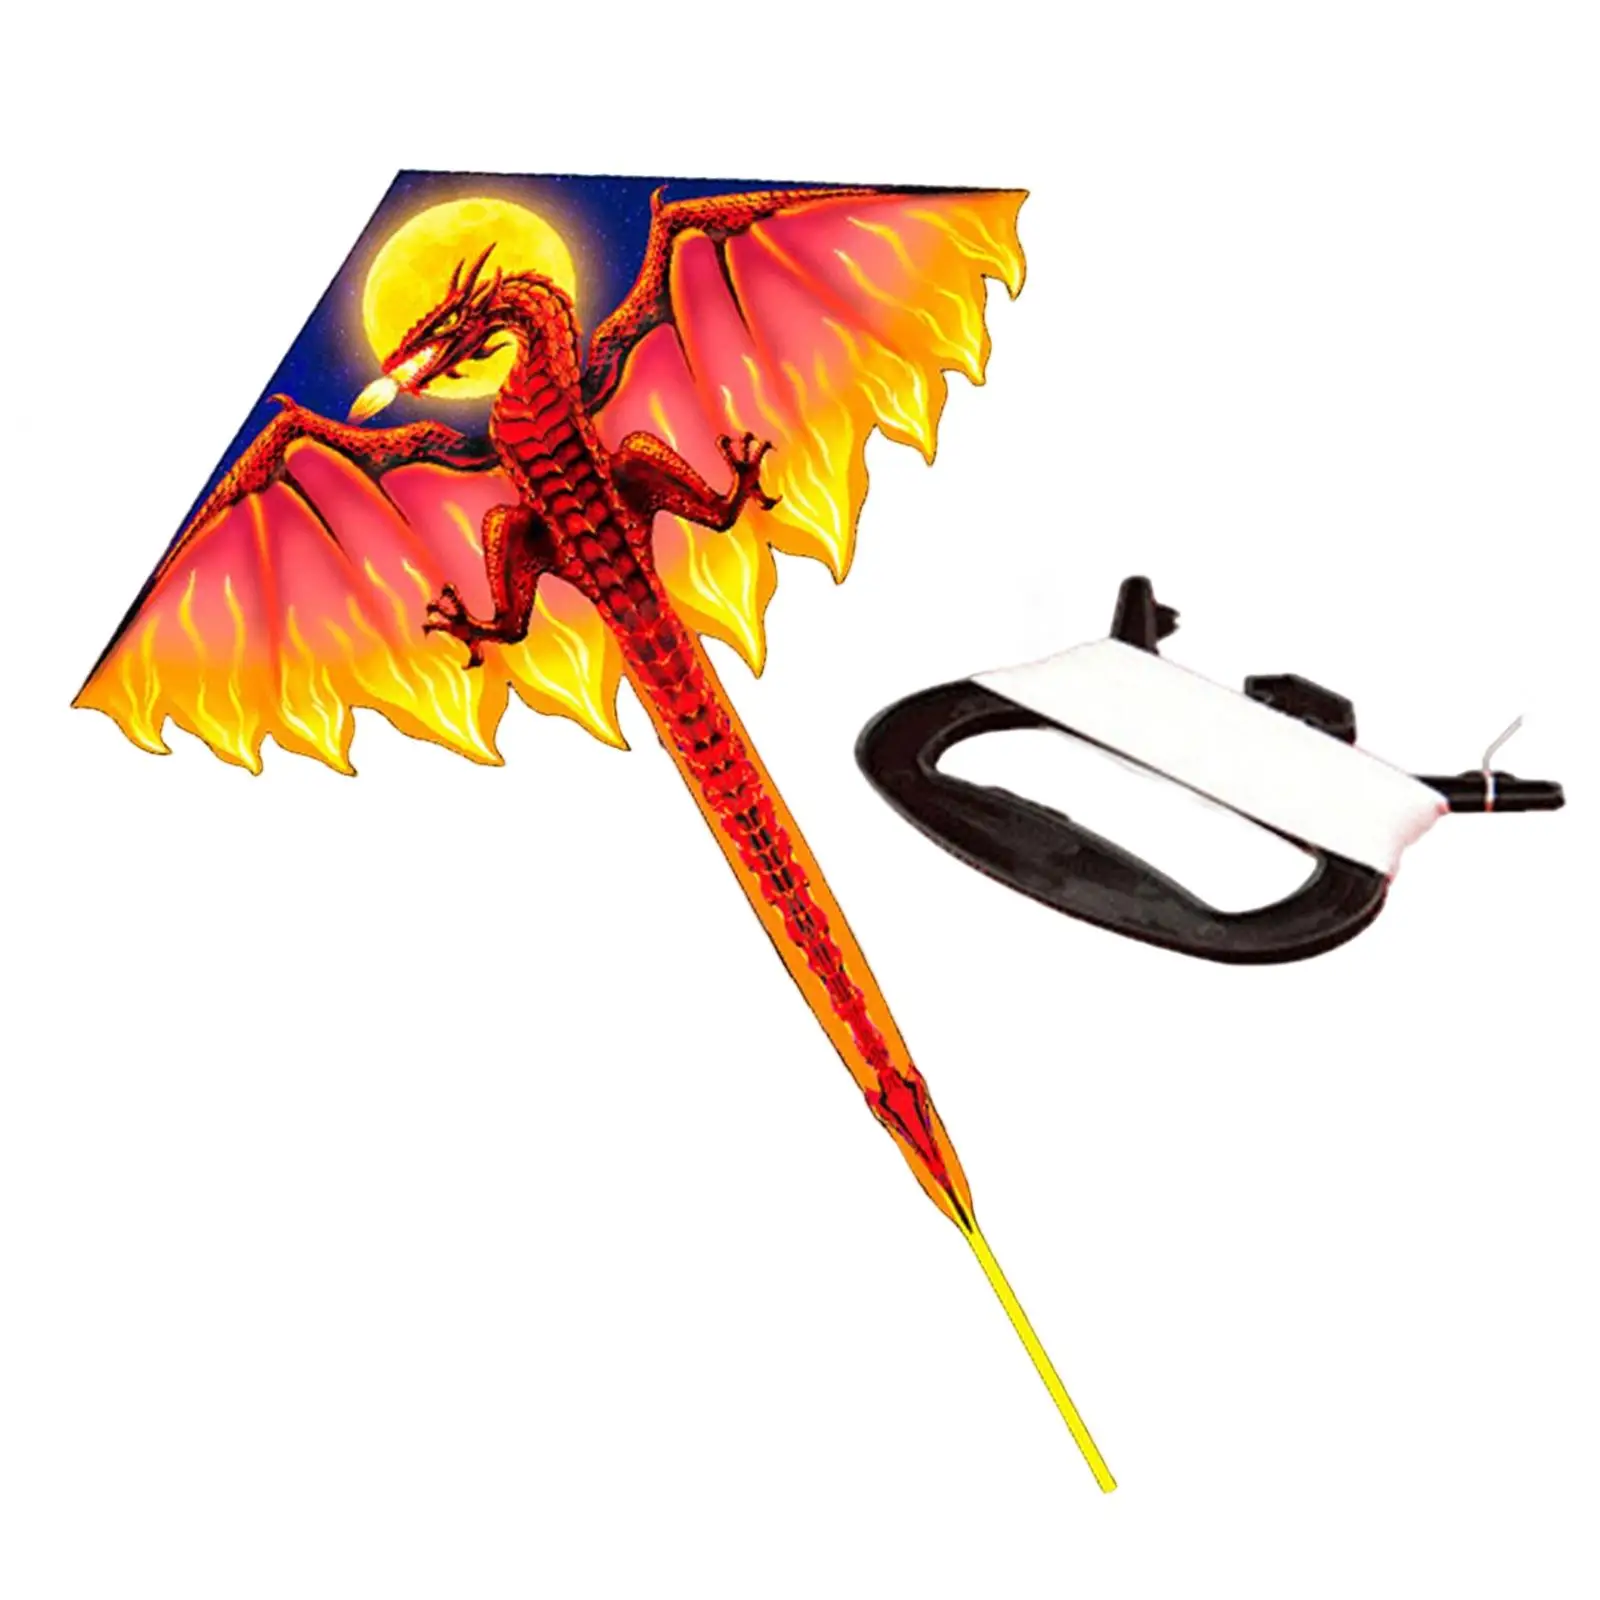 Large Spring Kite ice to Fly Colorful 3D dragon Animal for Park Beach Windy Day family